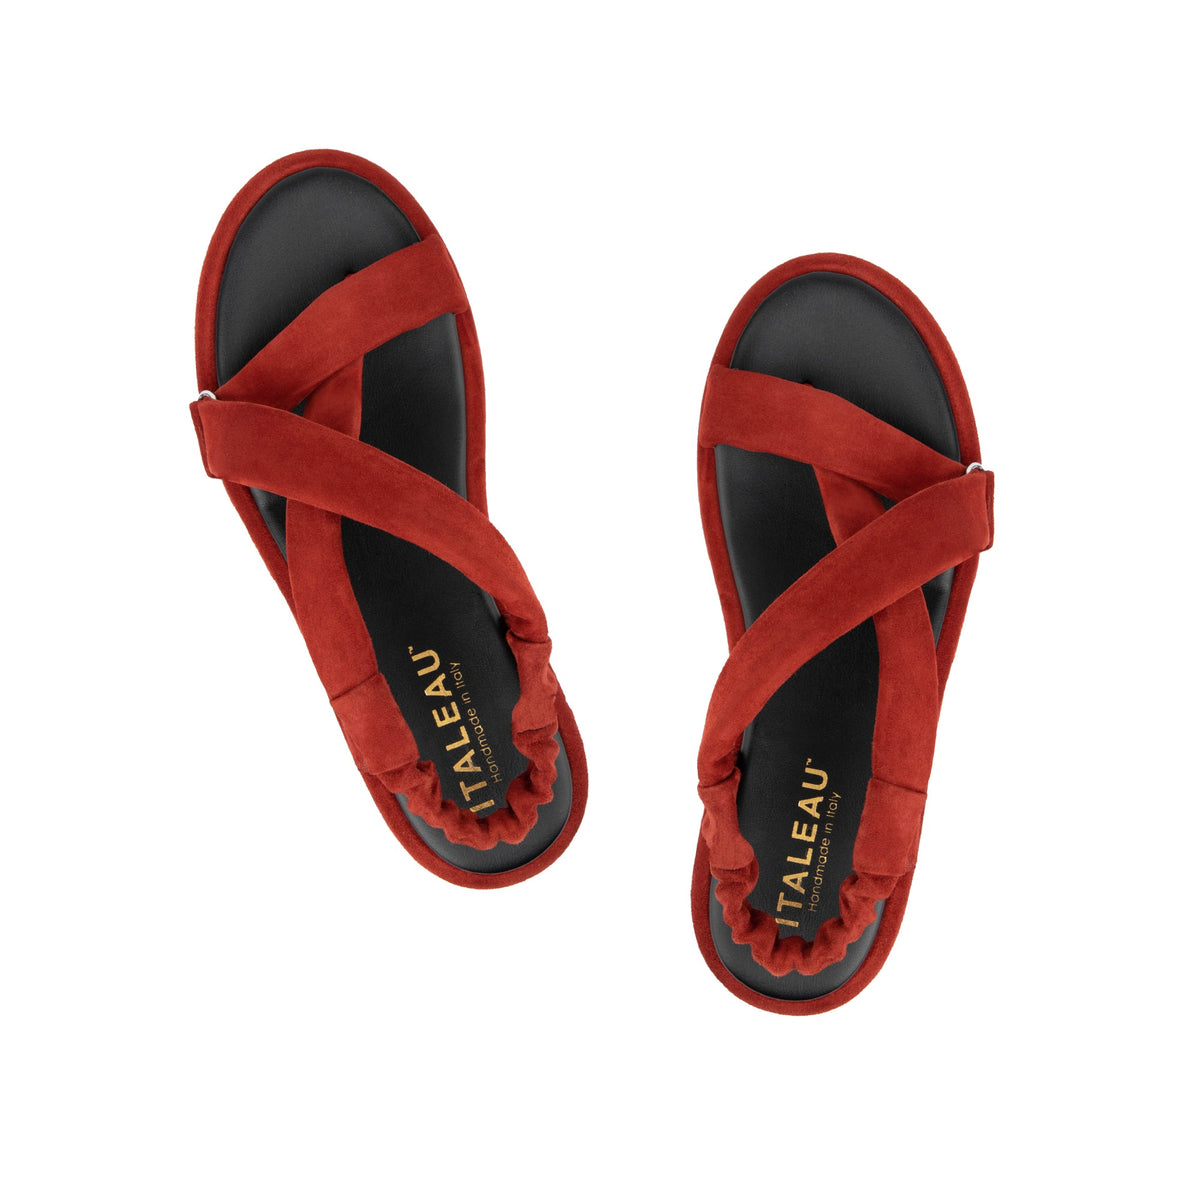 Italeau Zanita sandals are chic and comfortable. Handmade in Italy